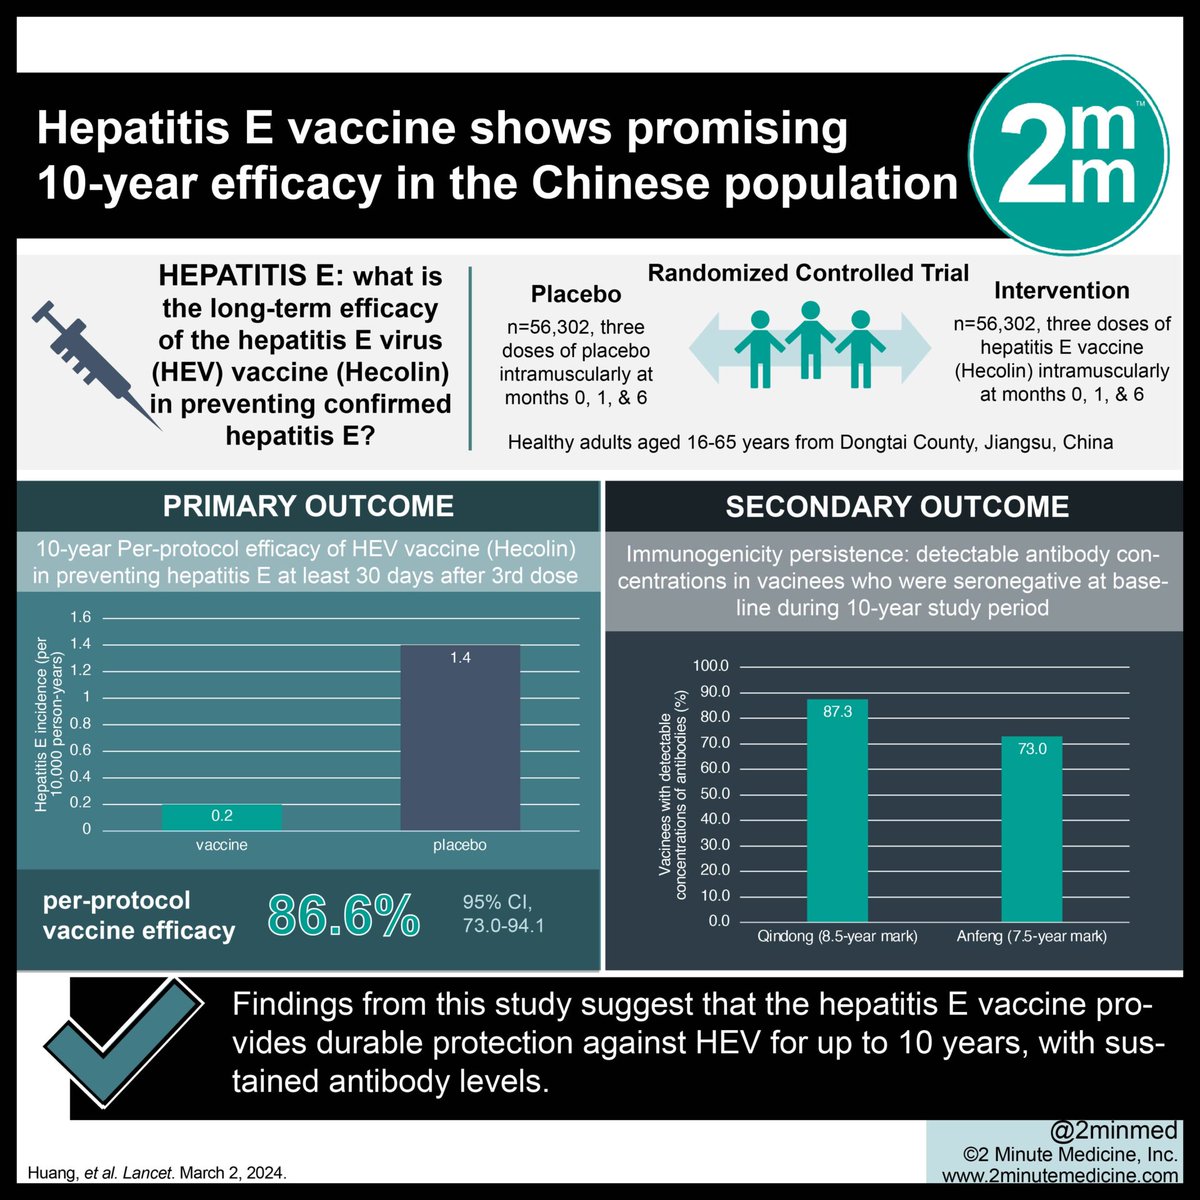 #VisualAbstract: Hepatitis E vaccine shows promising 10-year efficacy in the Chinese population dlvr.it/T63BBz #StudyGraphics #gastroenterolgy